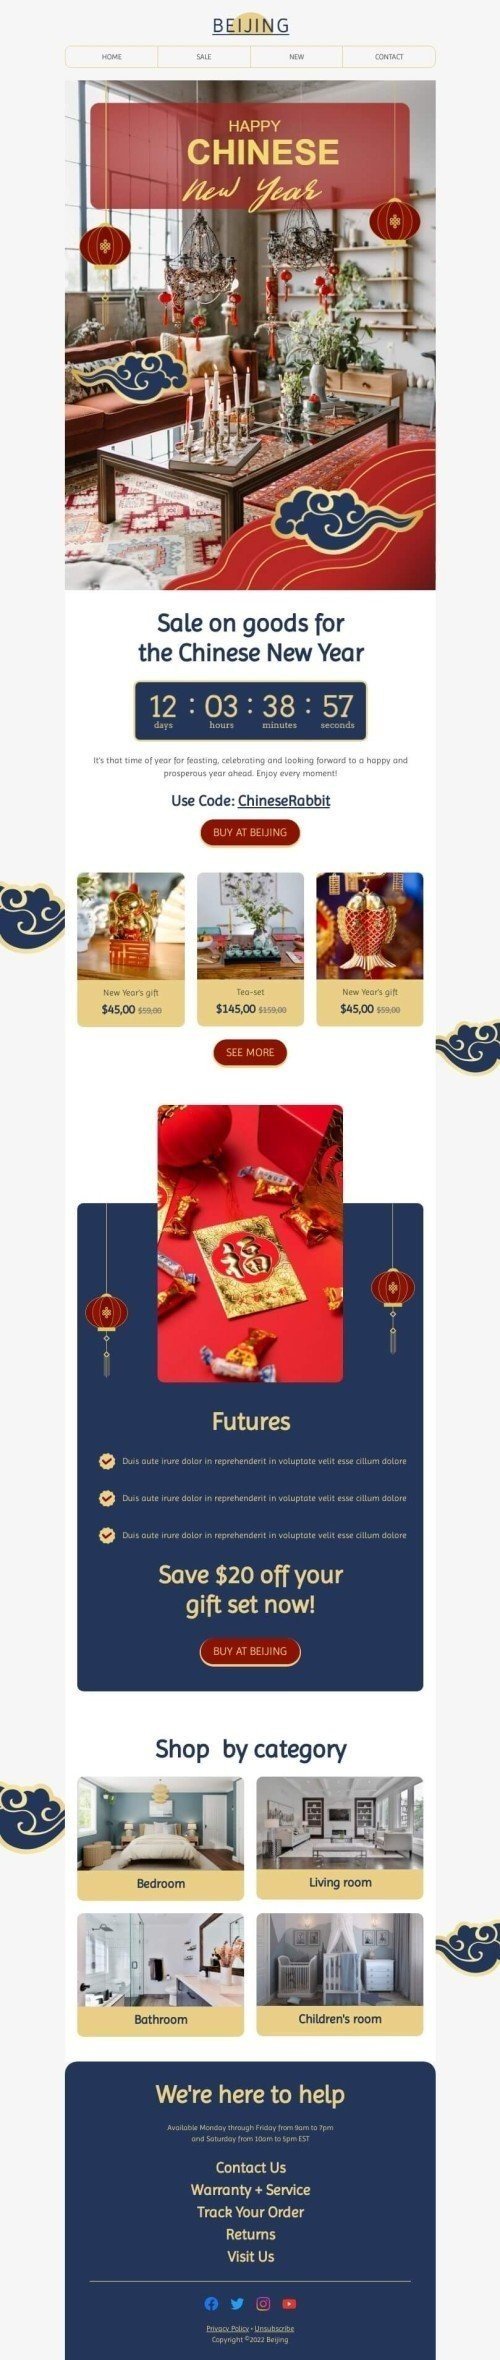 Chinese New Year email template "Chinese New Year miracle" for furniture, interior & DIY industry desktop view